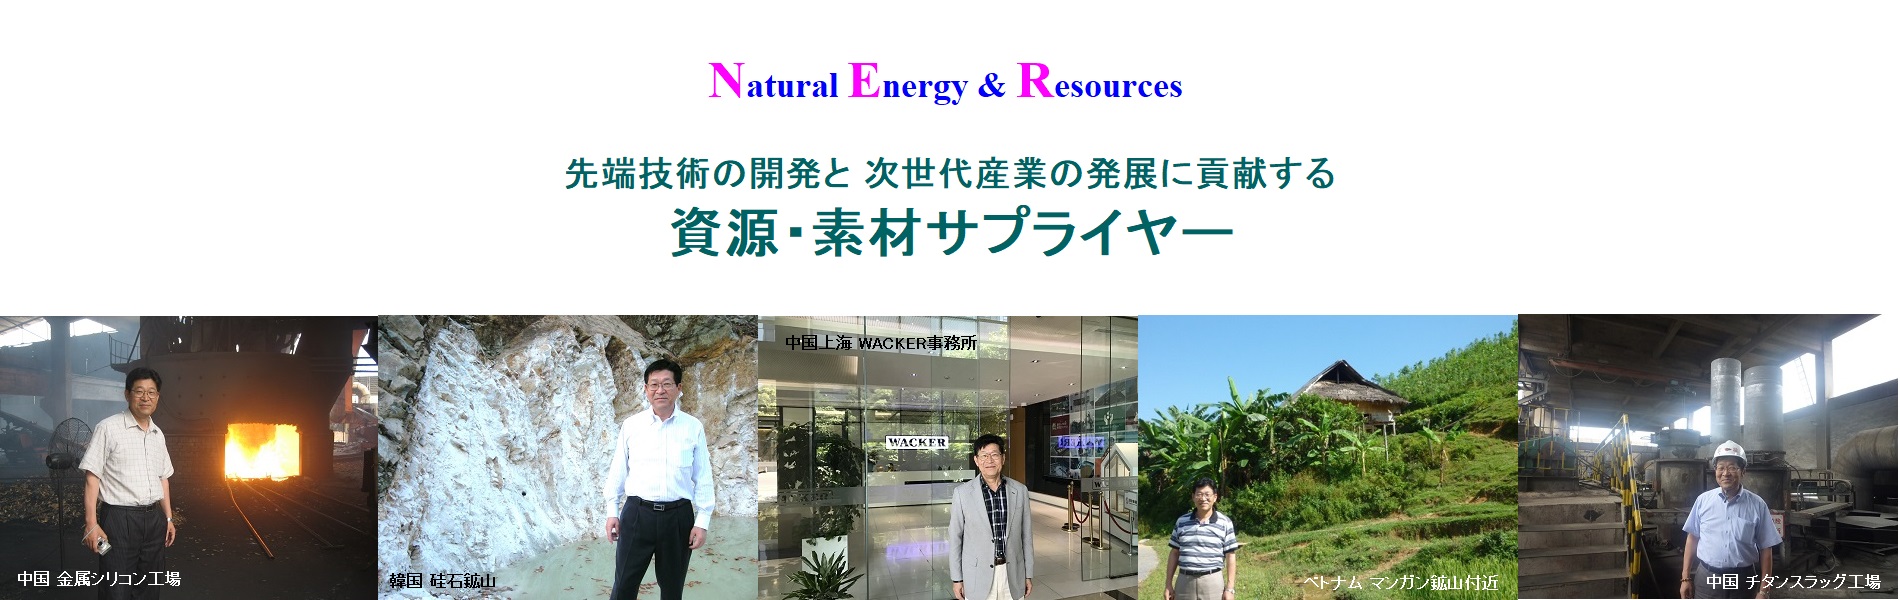 Natural & Energy & Resources